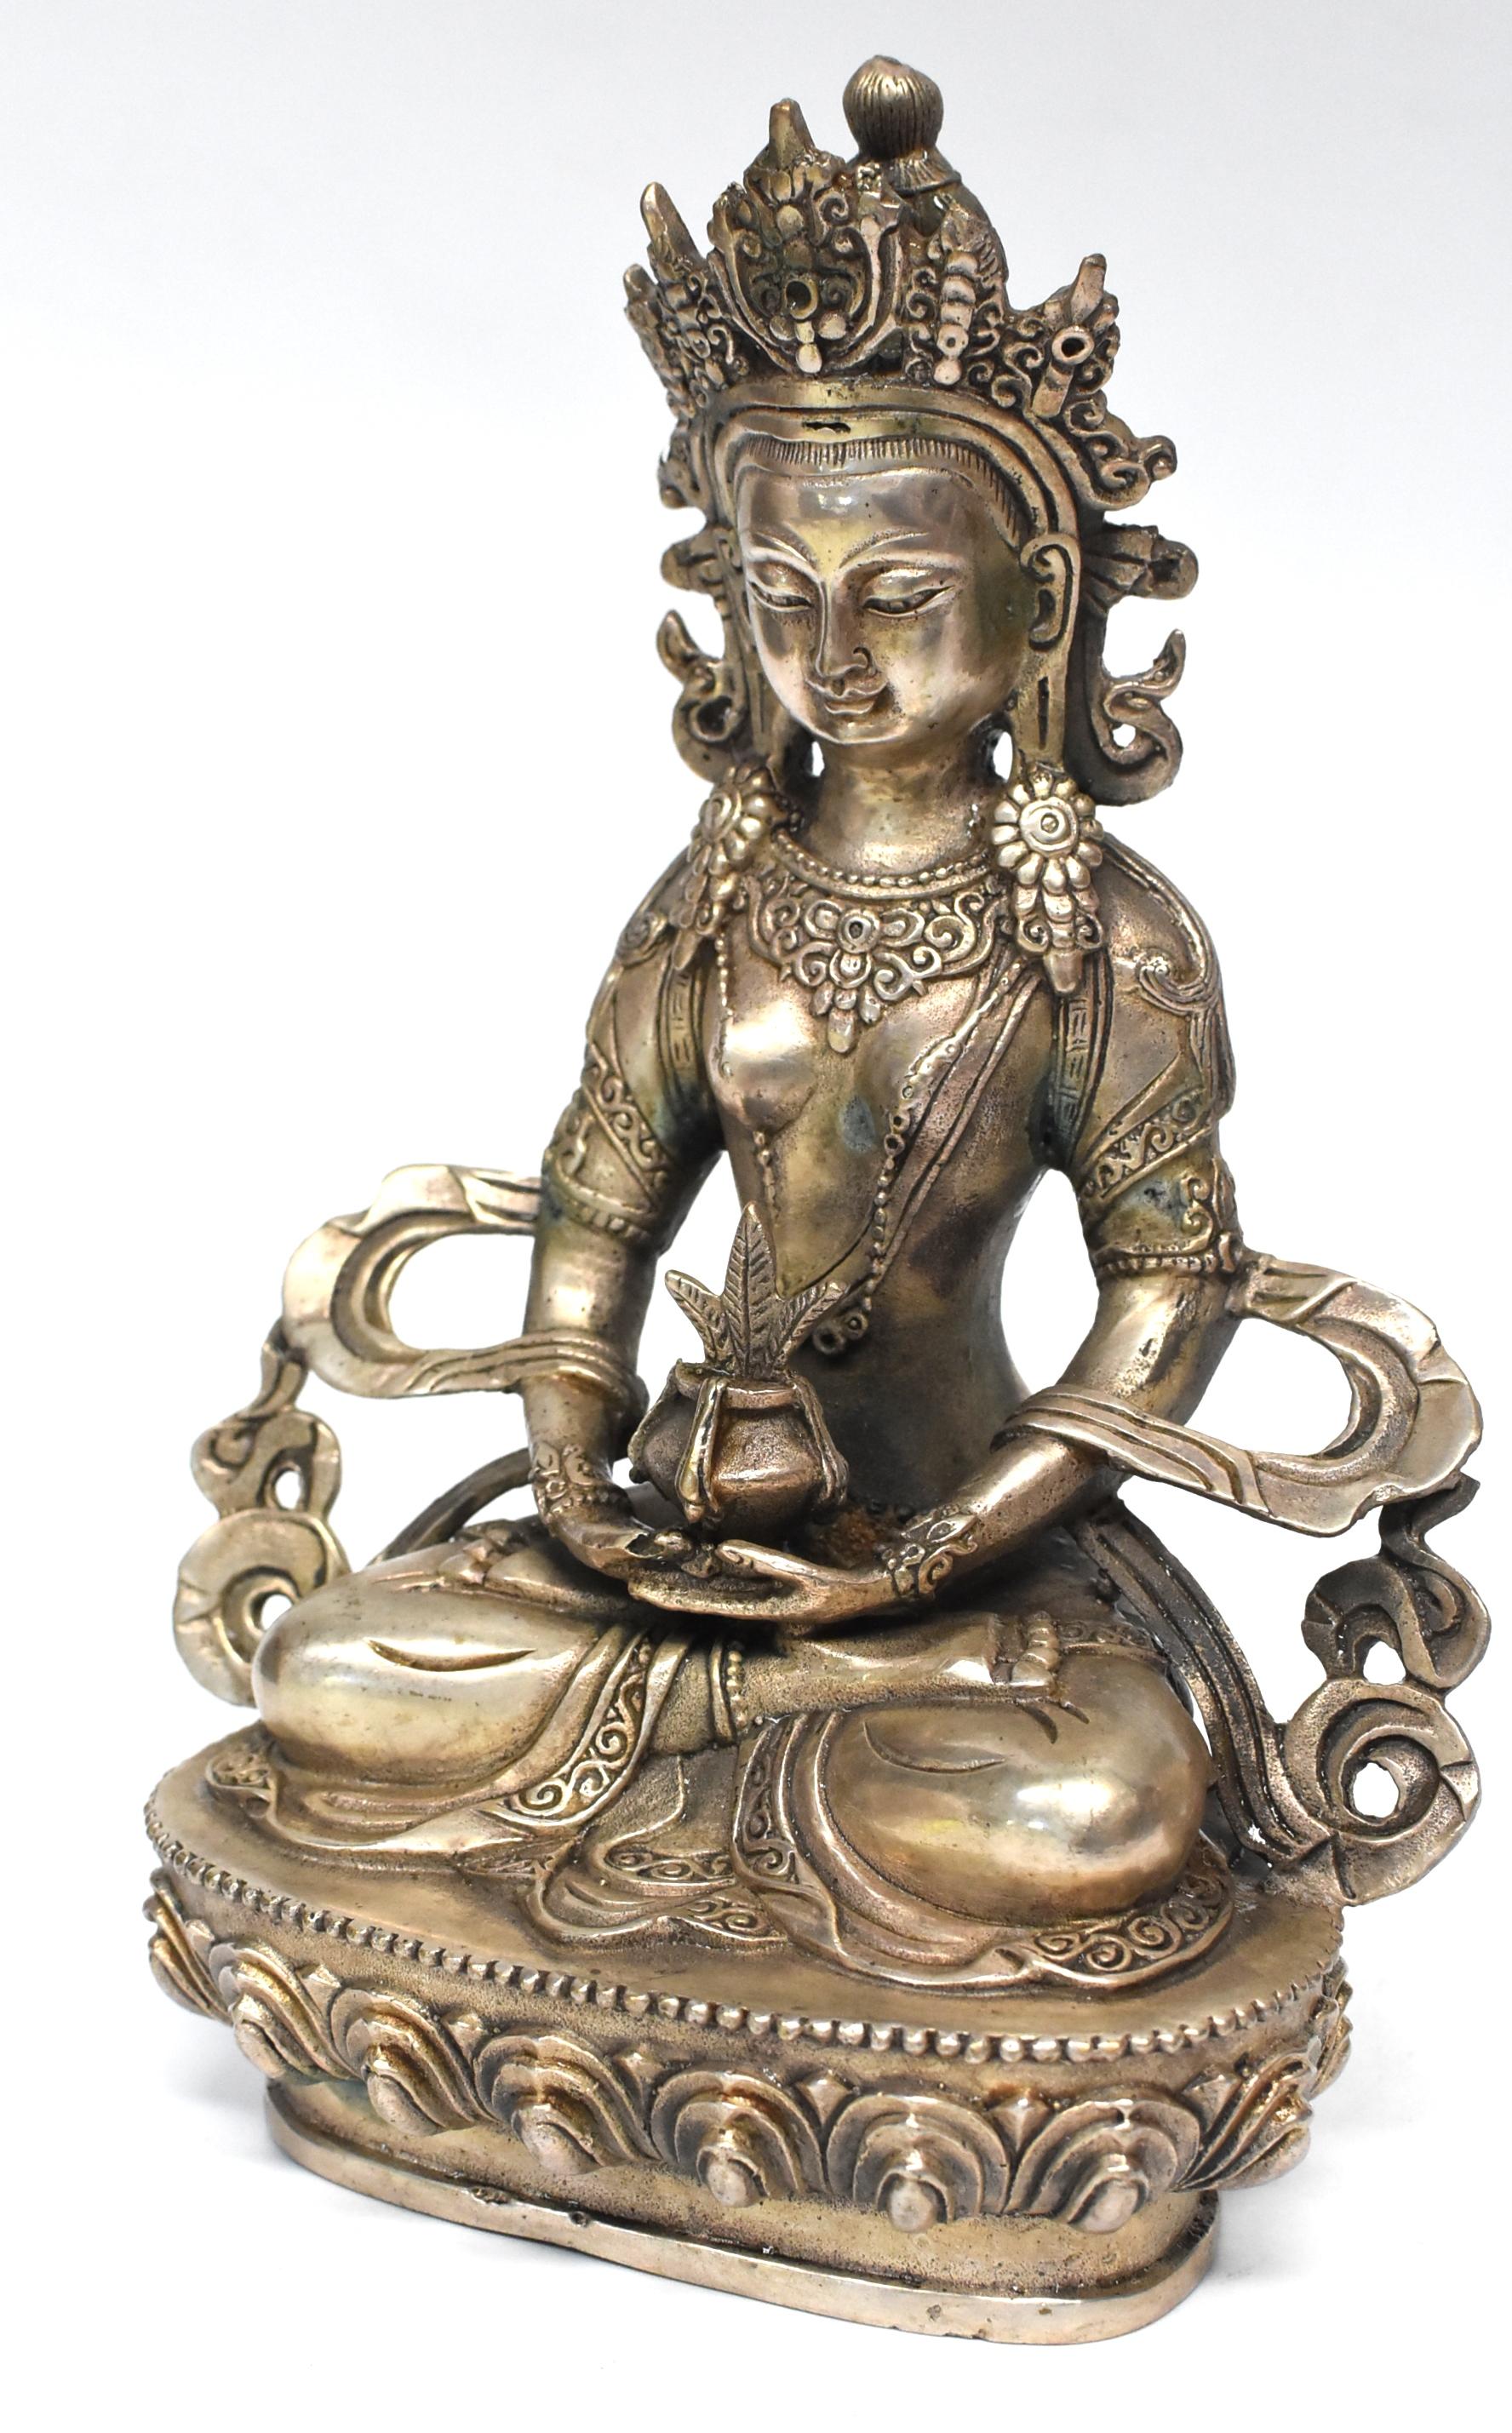 A beautiful silver sculpture of The Tibetan Amitayus, the Bodhissatva/buddha of infinite life, a tantric for of Amitabha, the Buddha of Infinite Light. 
Adorned with necklaces, crown and sashes decorated with rosettes, pearls and medallions, Buddha